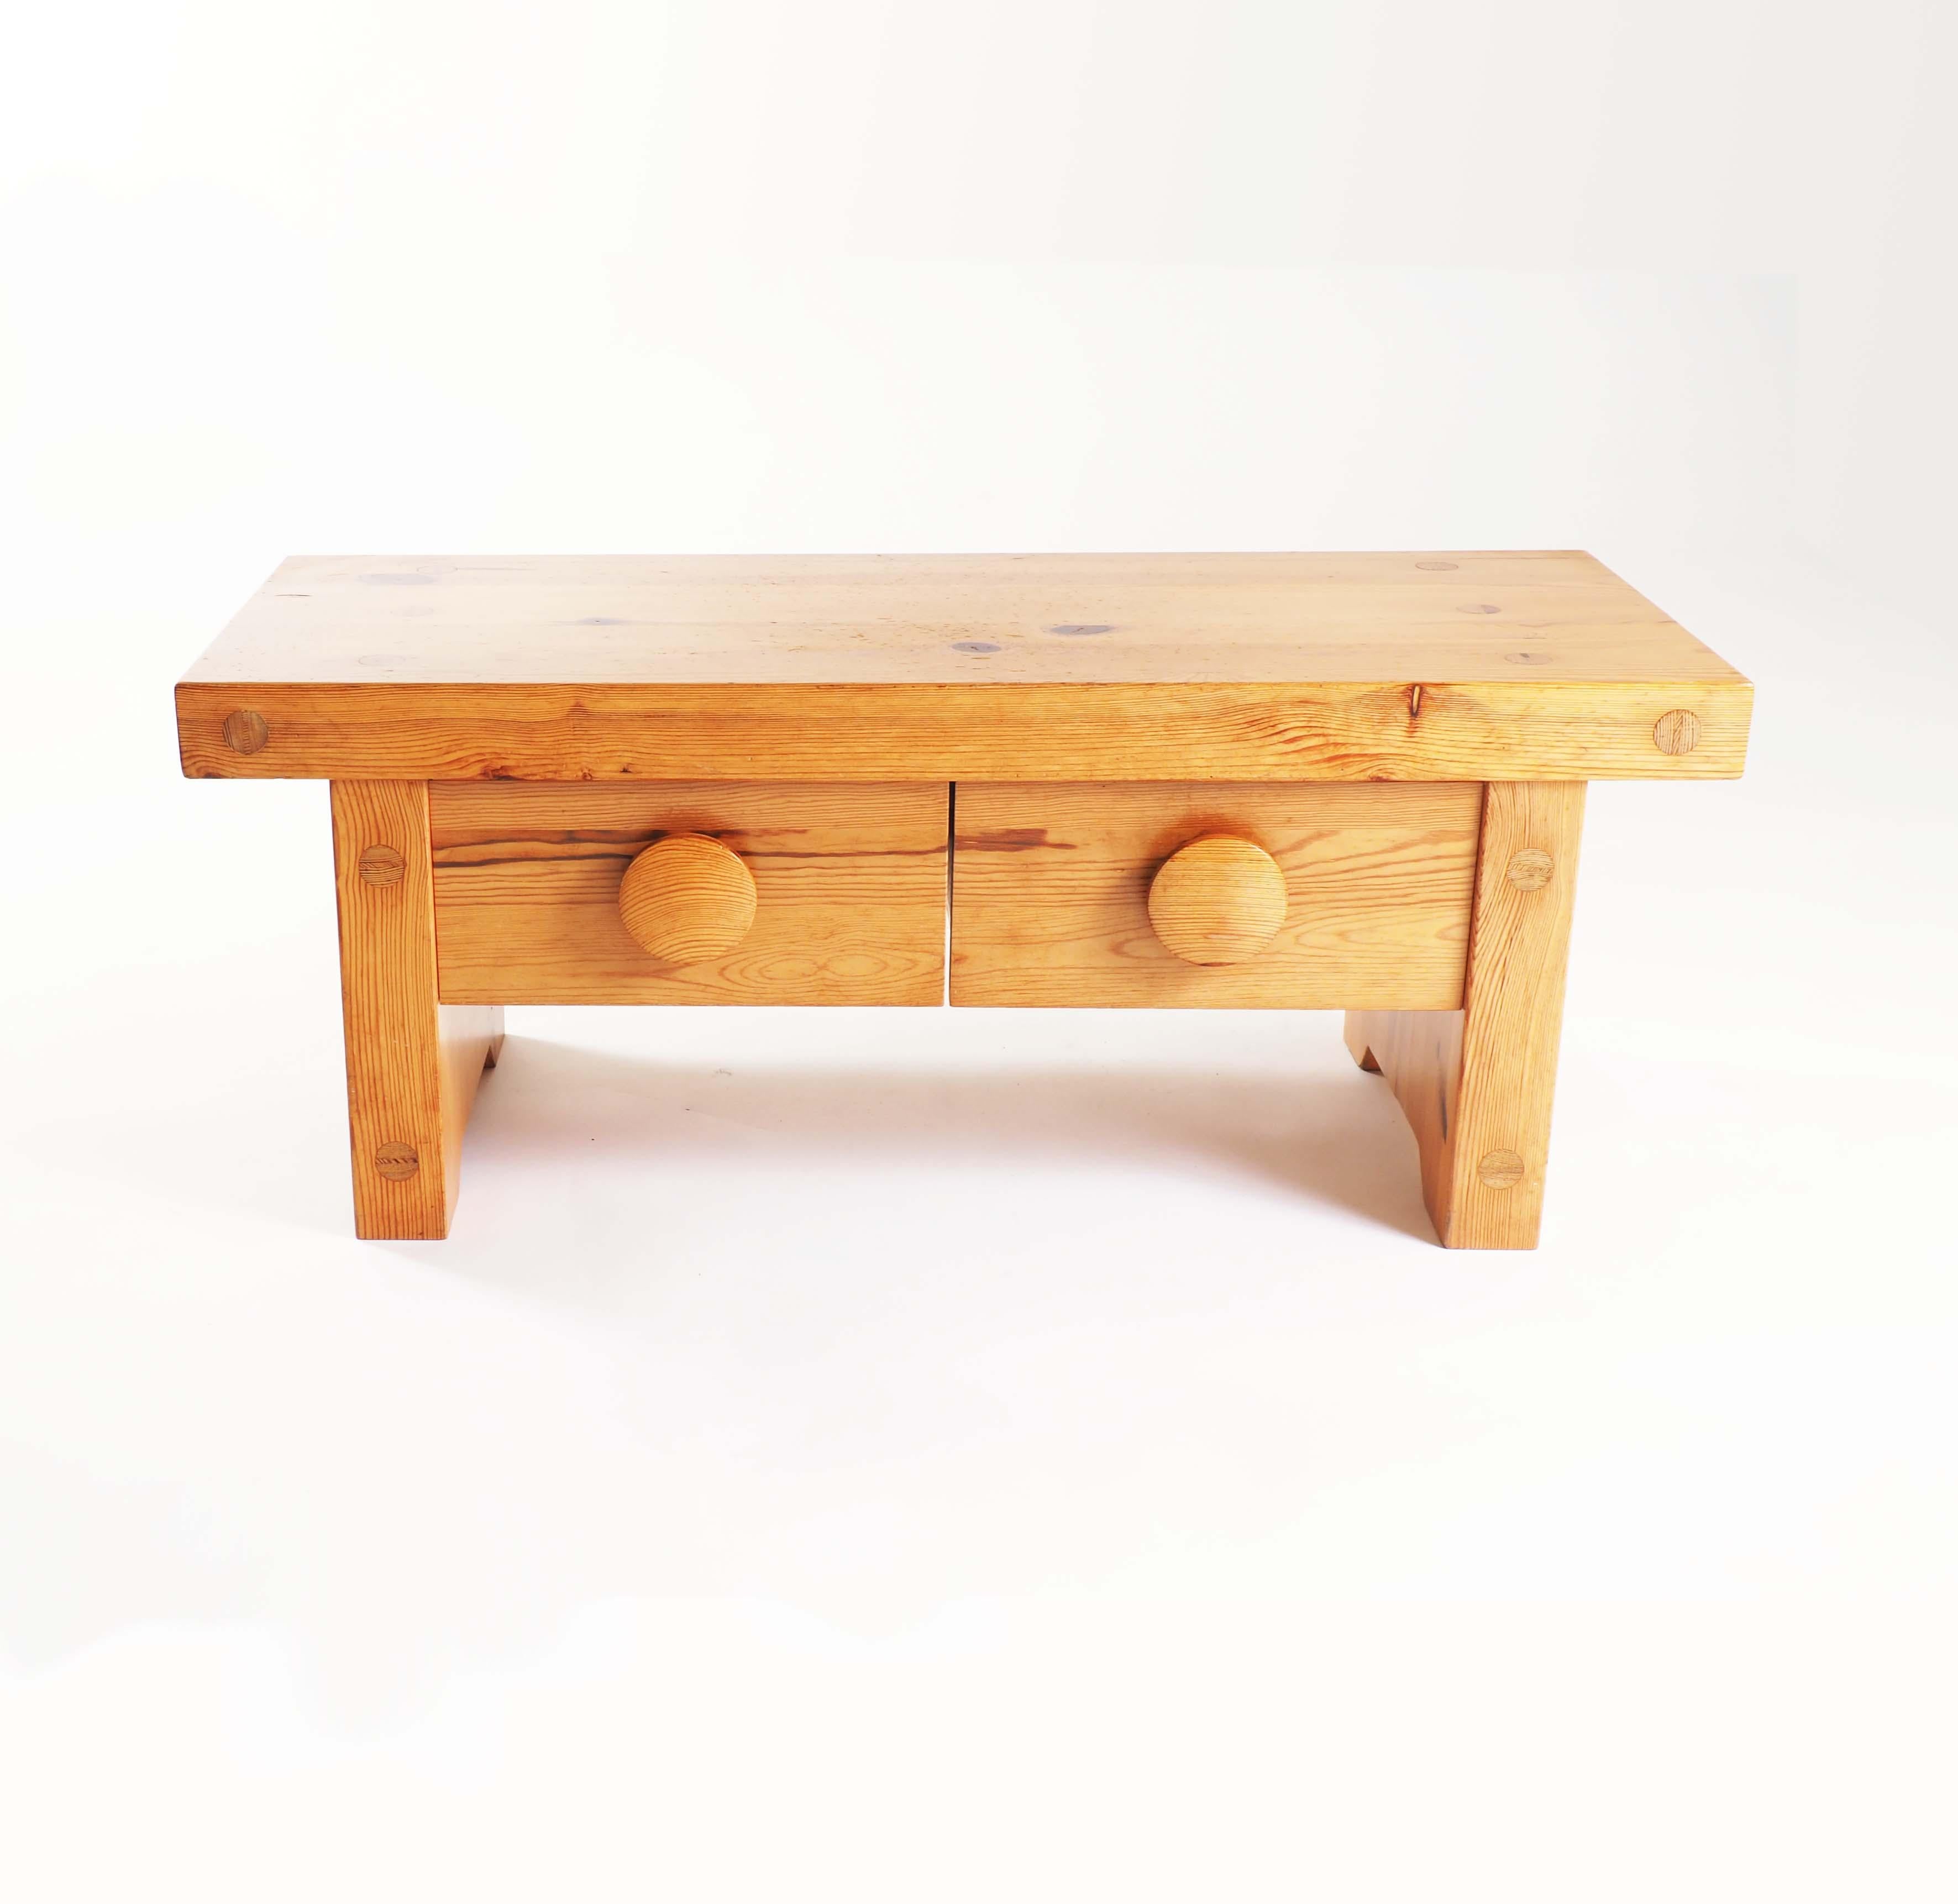 Rustic hall bench in heavy and solid pine made by Fröseke, furniture maker in Sweden, 1970s.
This piece is possible to use as both storage and seating.